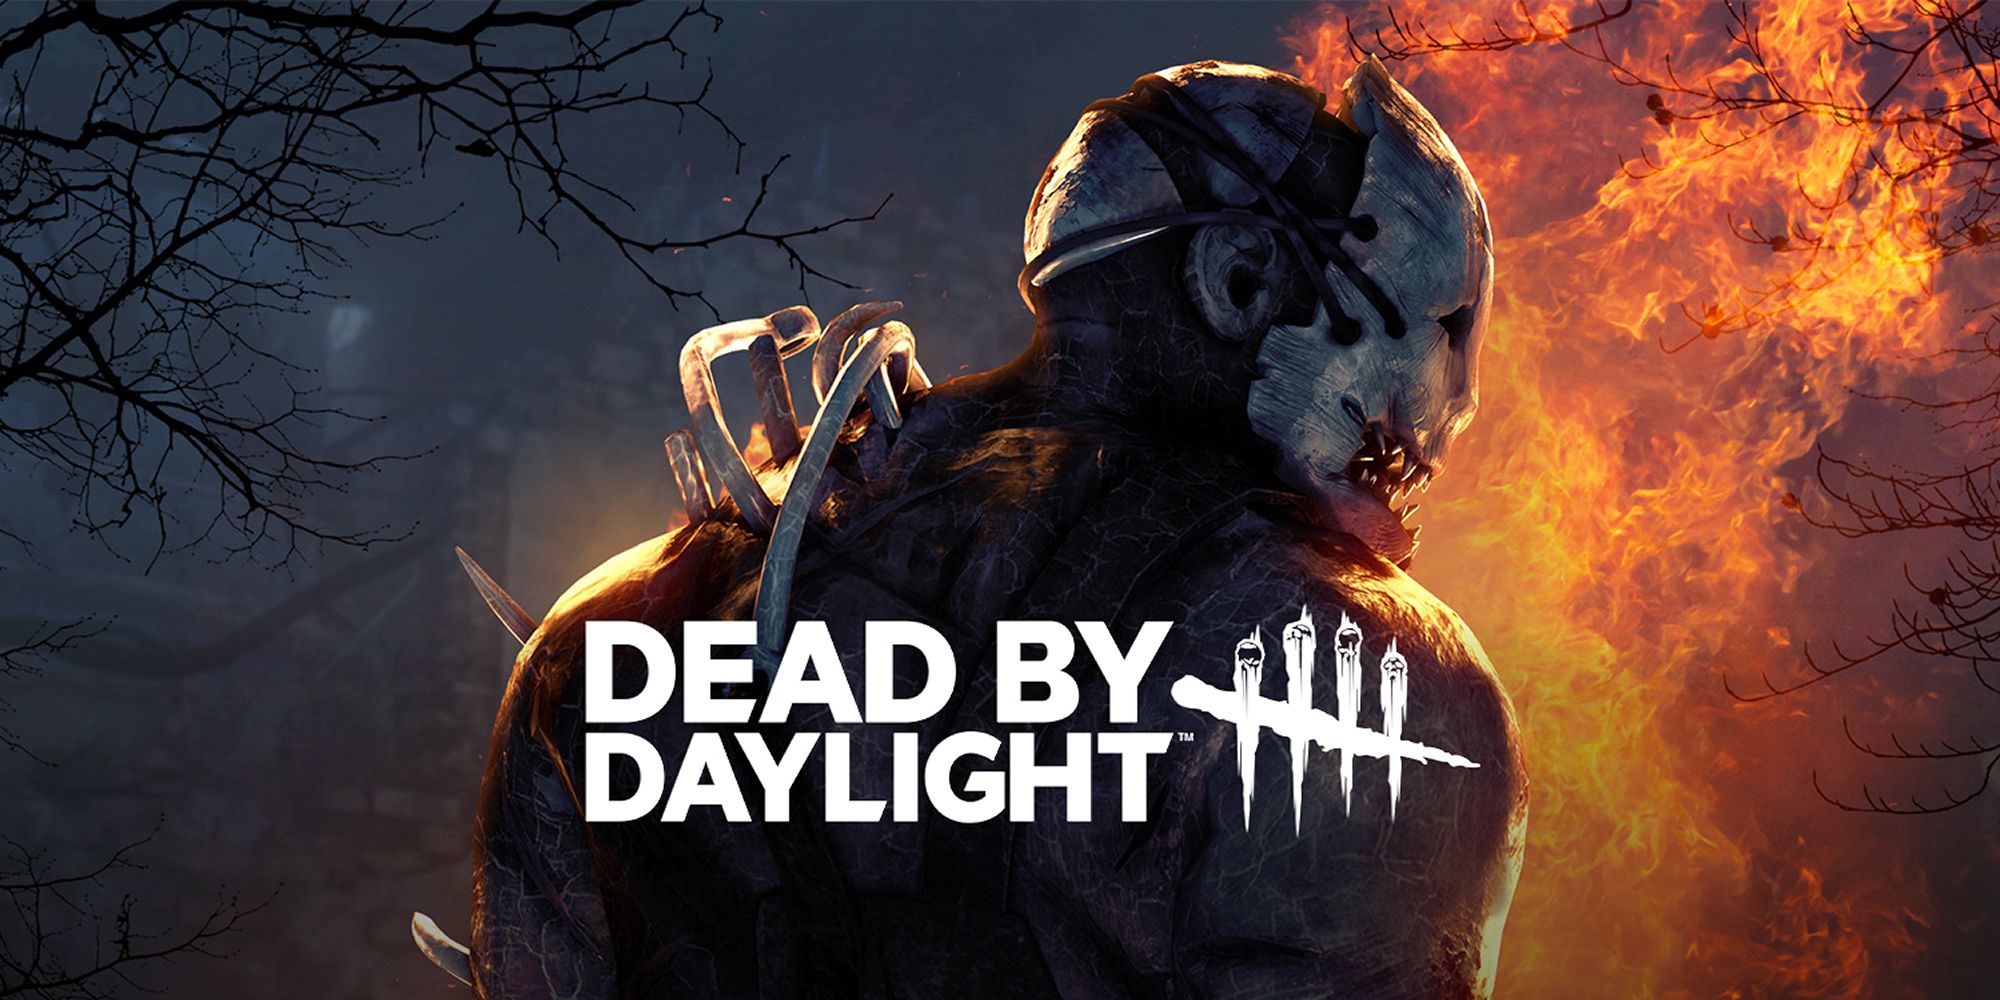 Dead By Daylight The Trapper Against A Flaming Scene